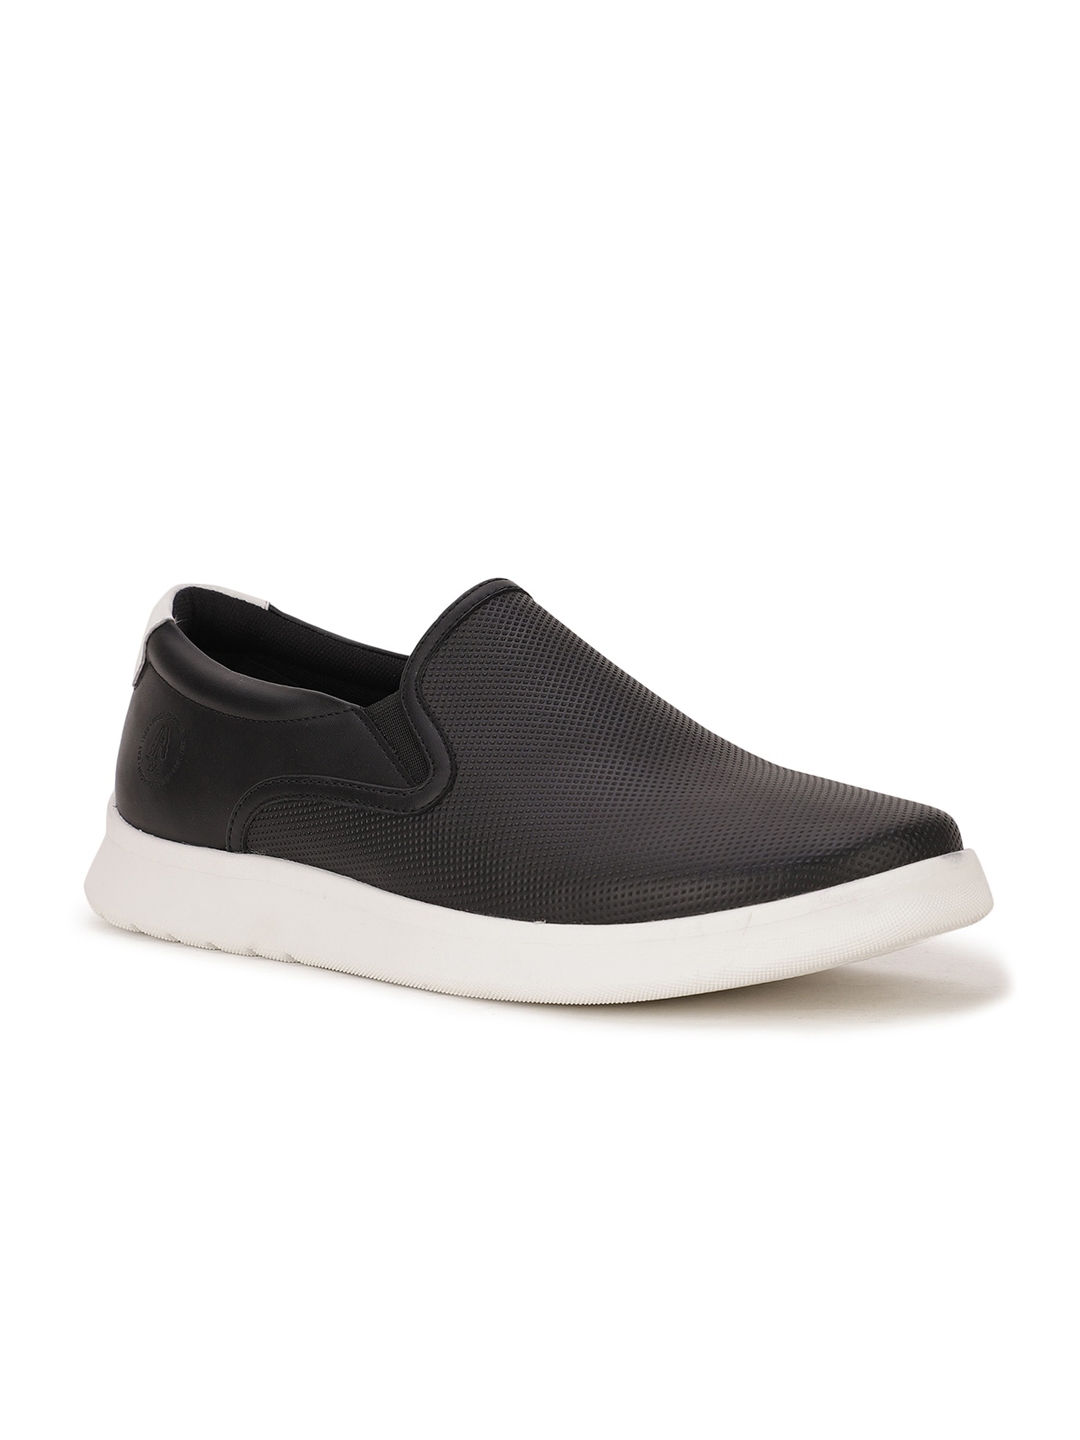 Buy Hush Puppies Men Black Textured PU Slip On Sneakers - Casual Shoes ...